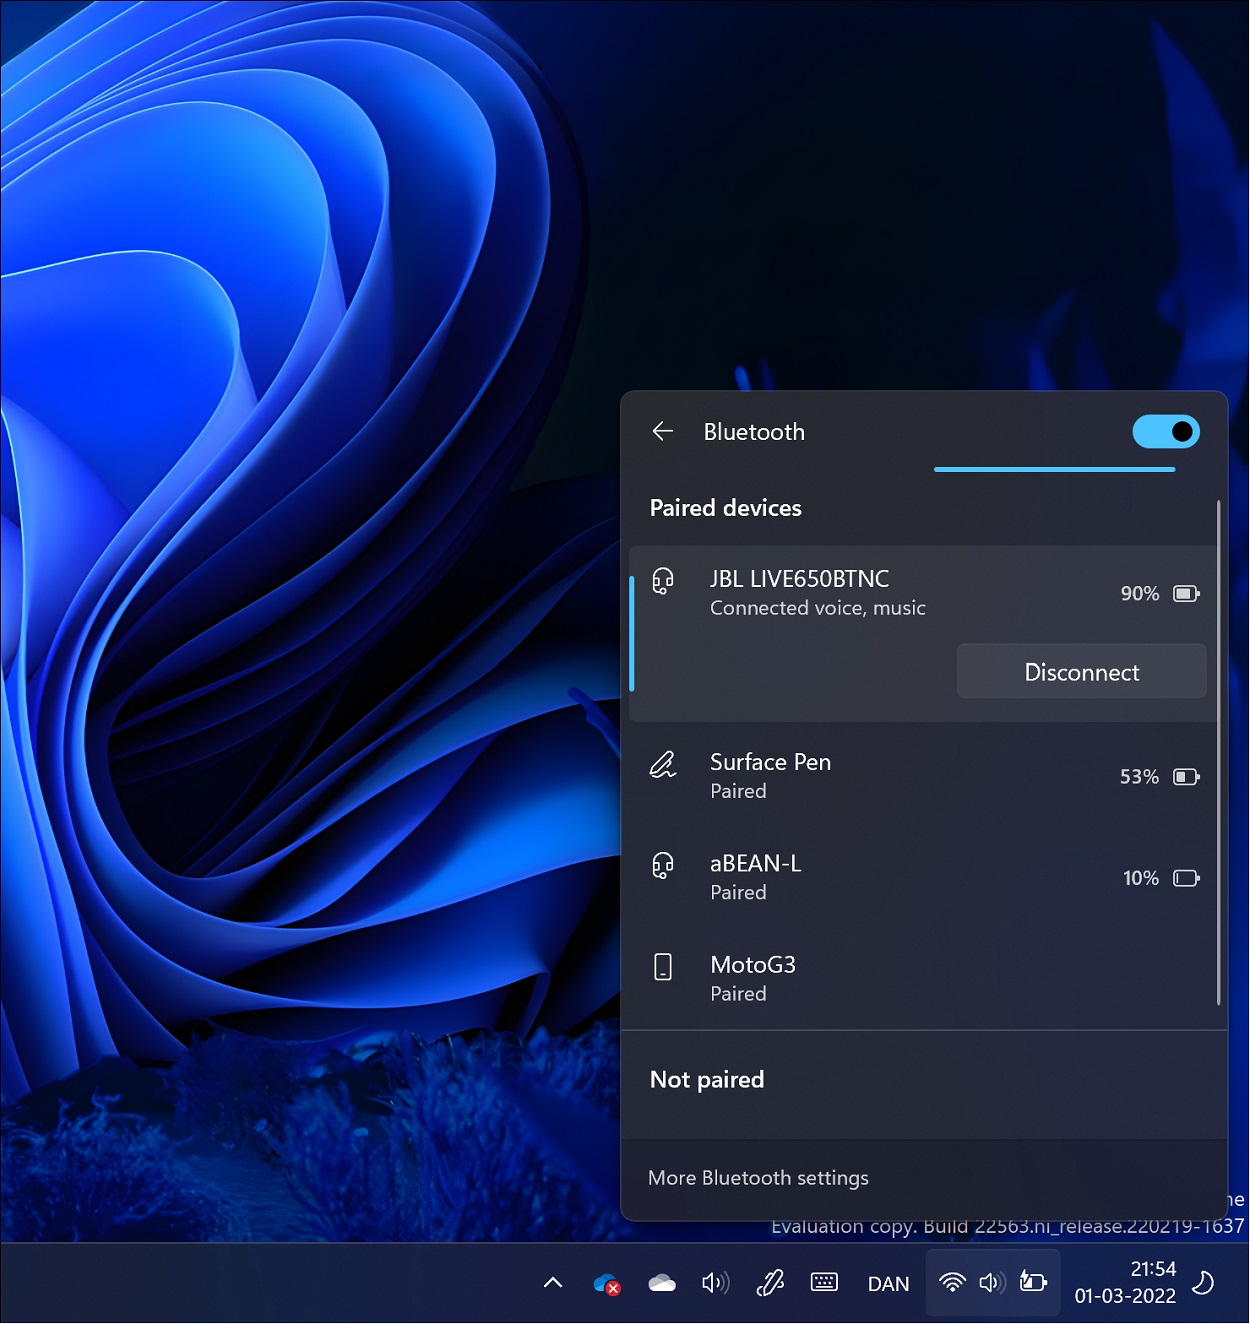 Windows 11 Version 23H2 — ISO Download (Official) 